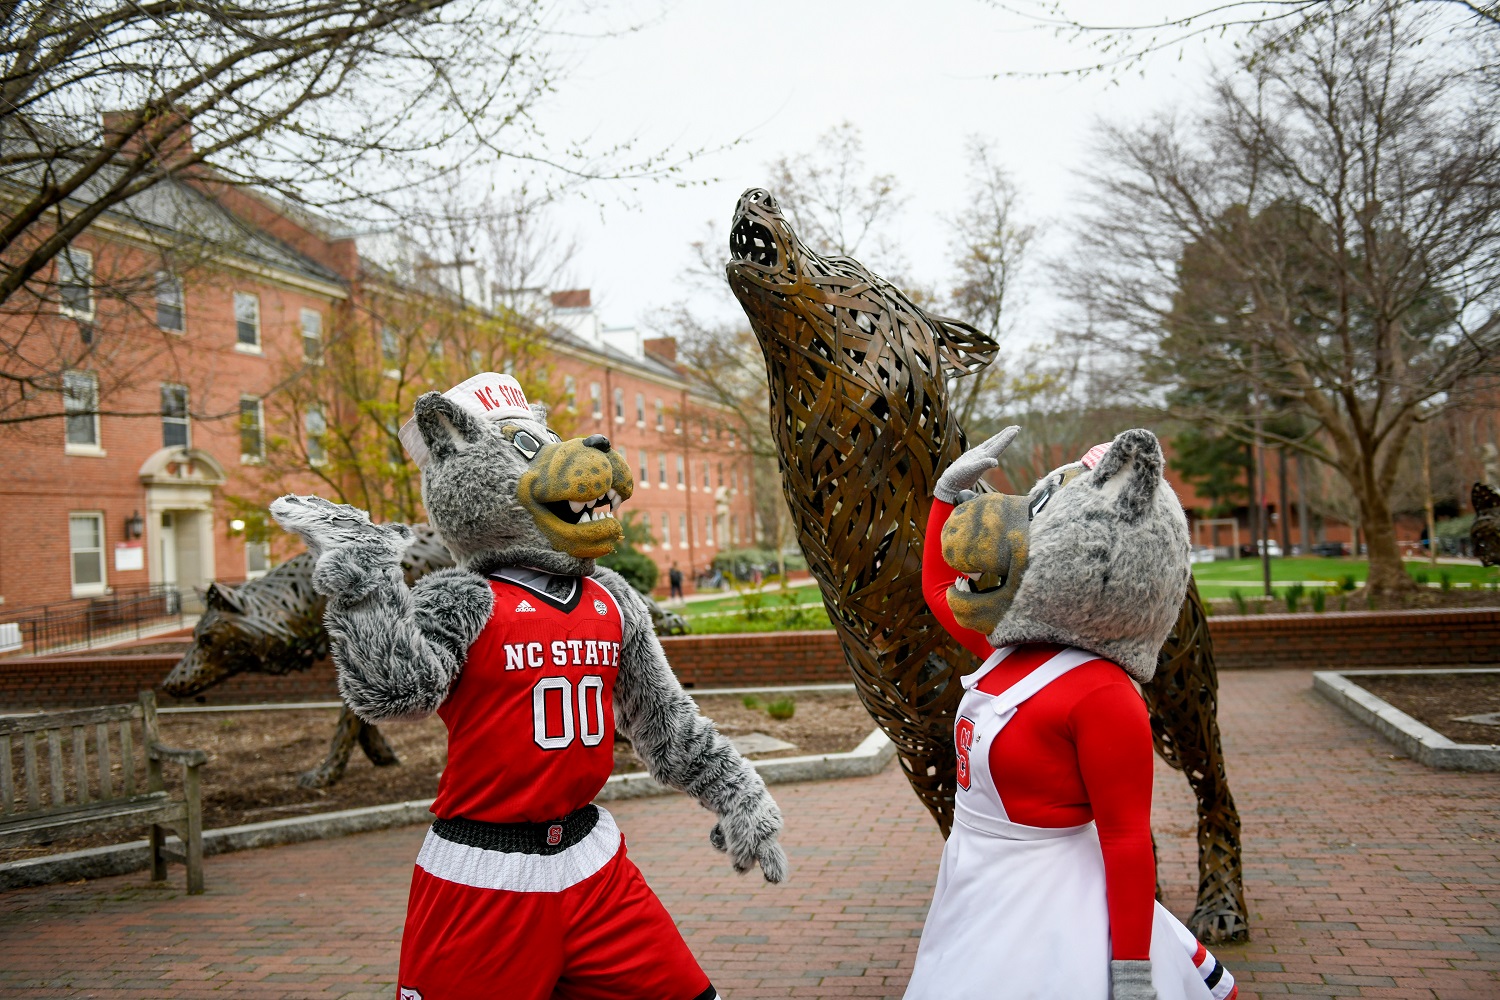 Mr. Wuf and Mrs. Wuf - Bonded by Paper Update 5 - Forest Biomaterials NC State University